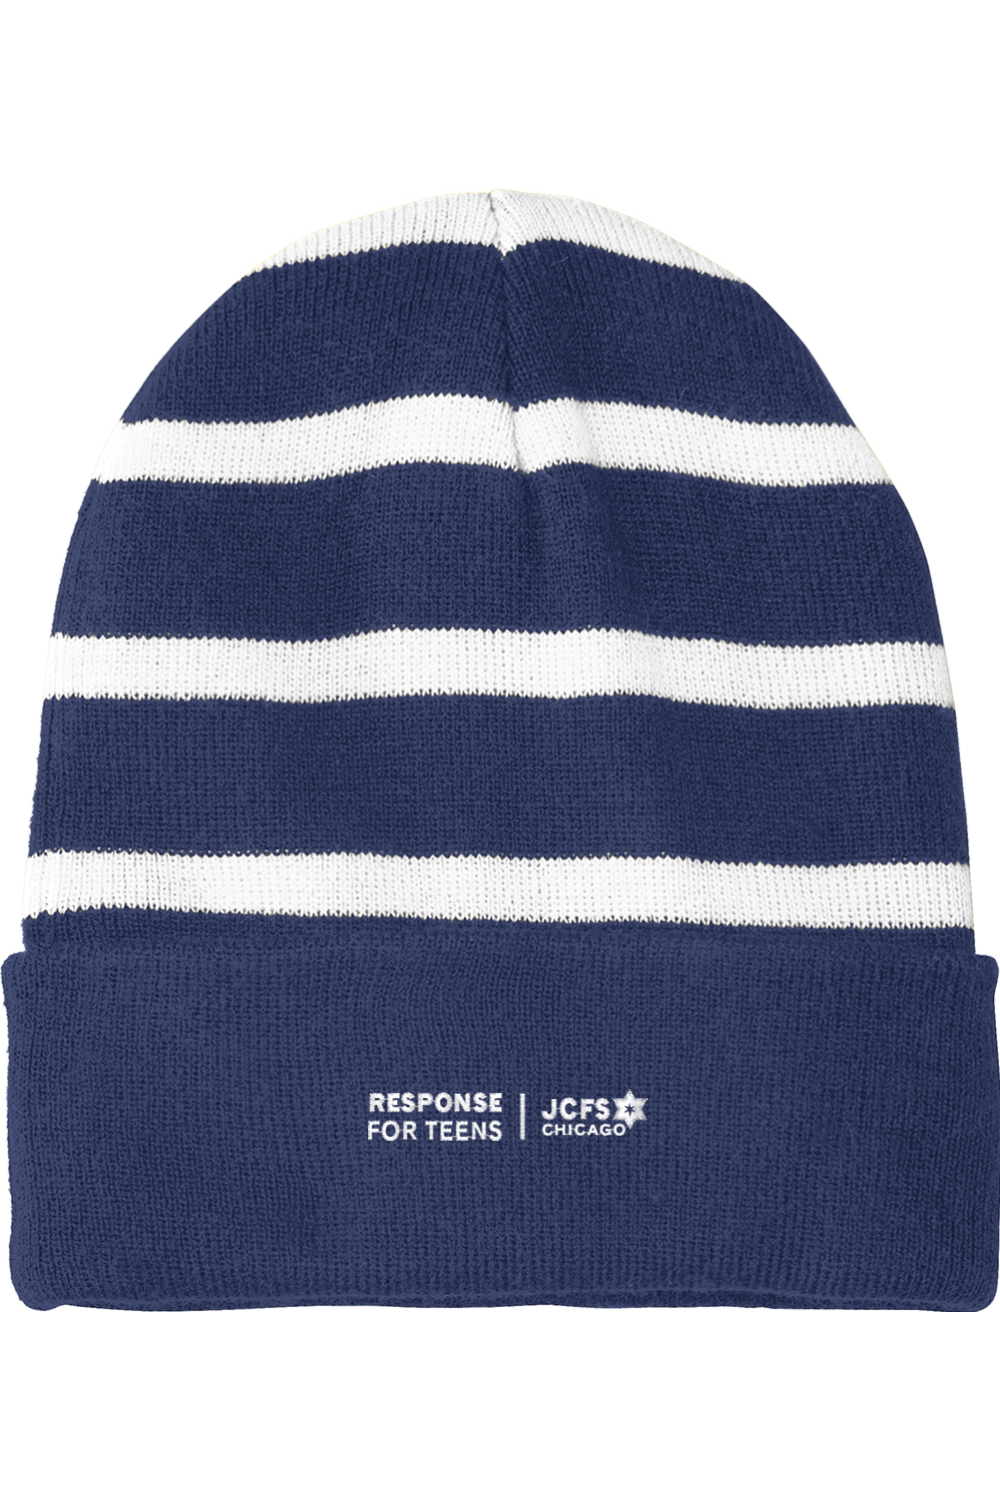 Sport-Tek Striped Beanie with Solid Band